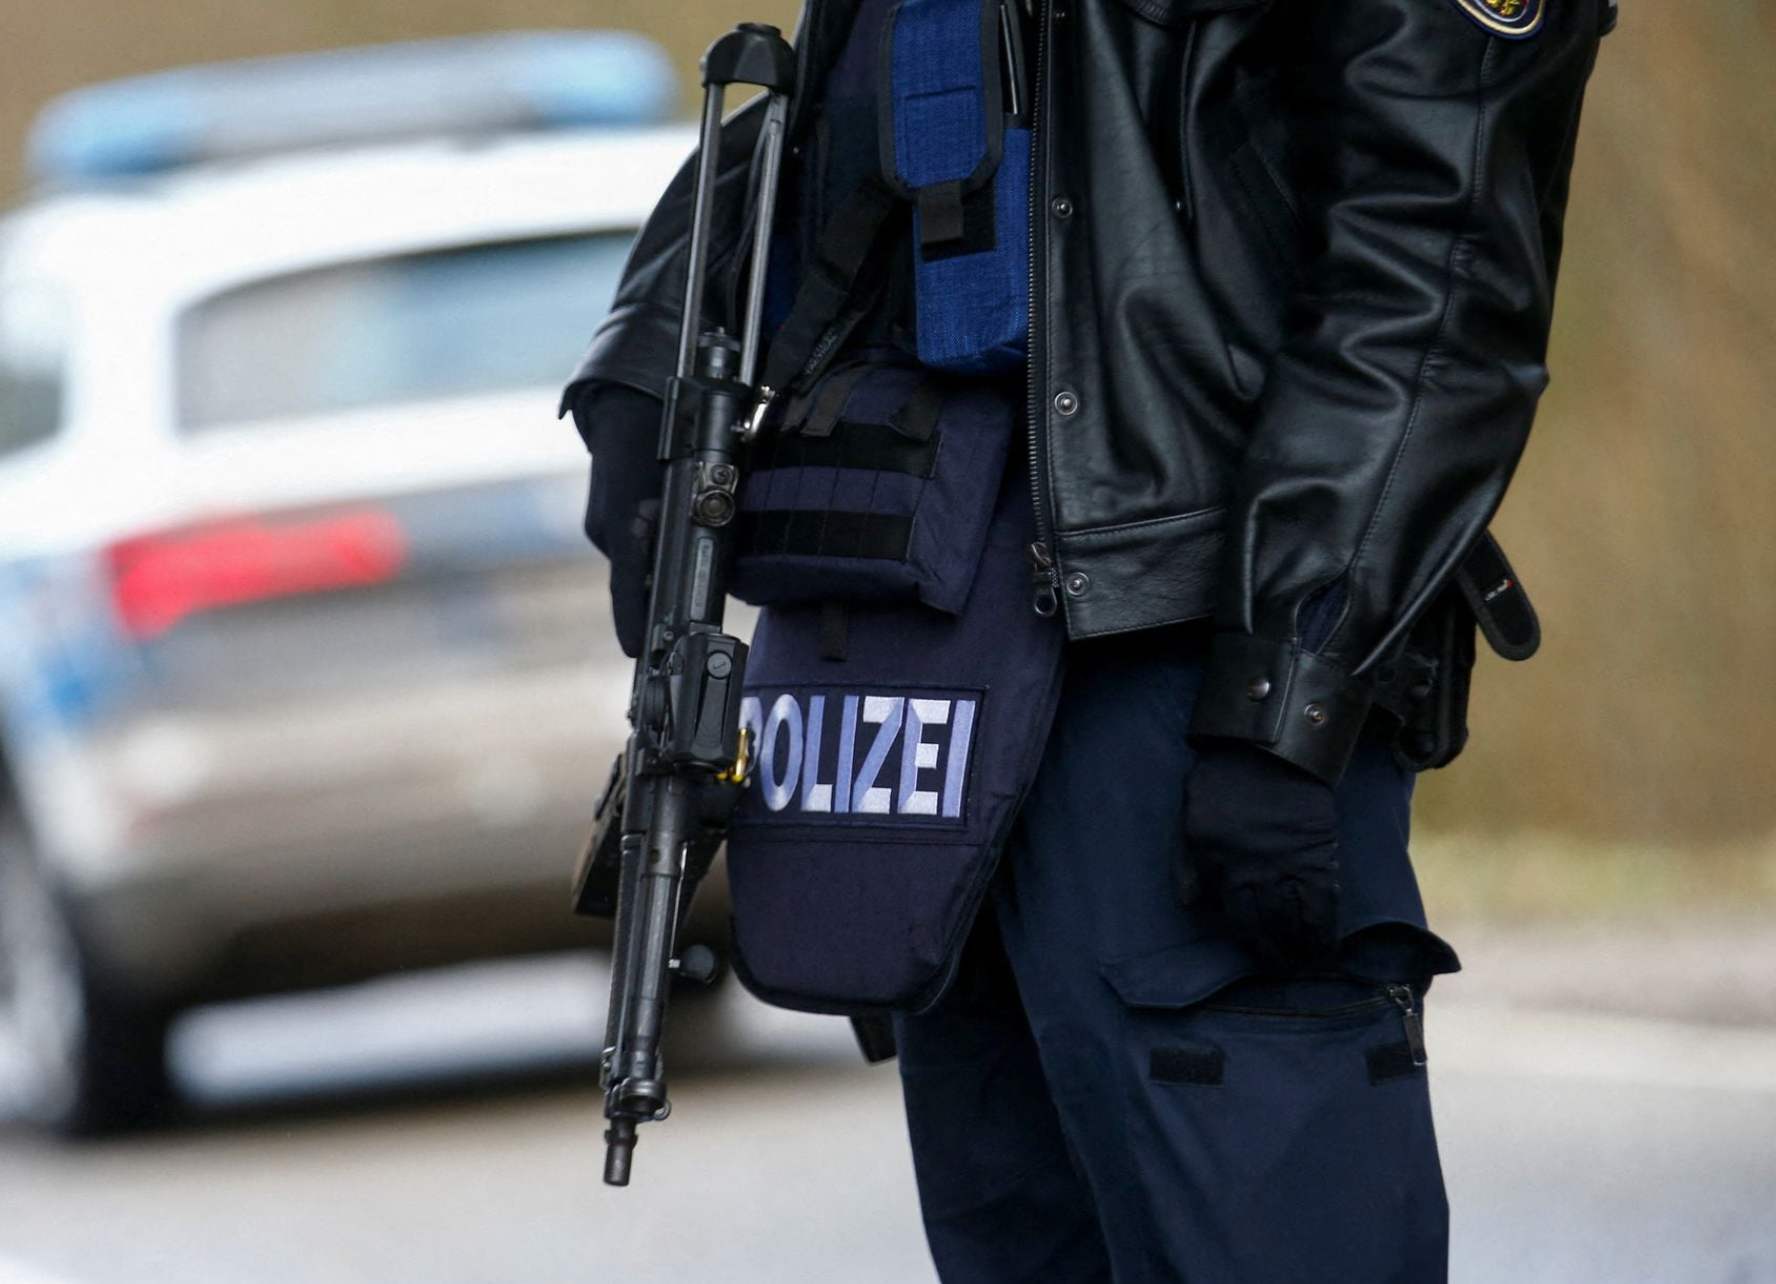 Germany arrests suspected antisemite who threatened killings, police say